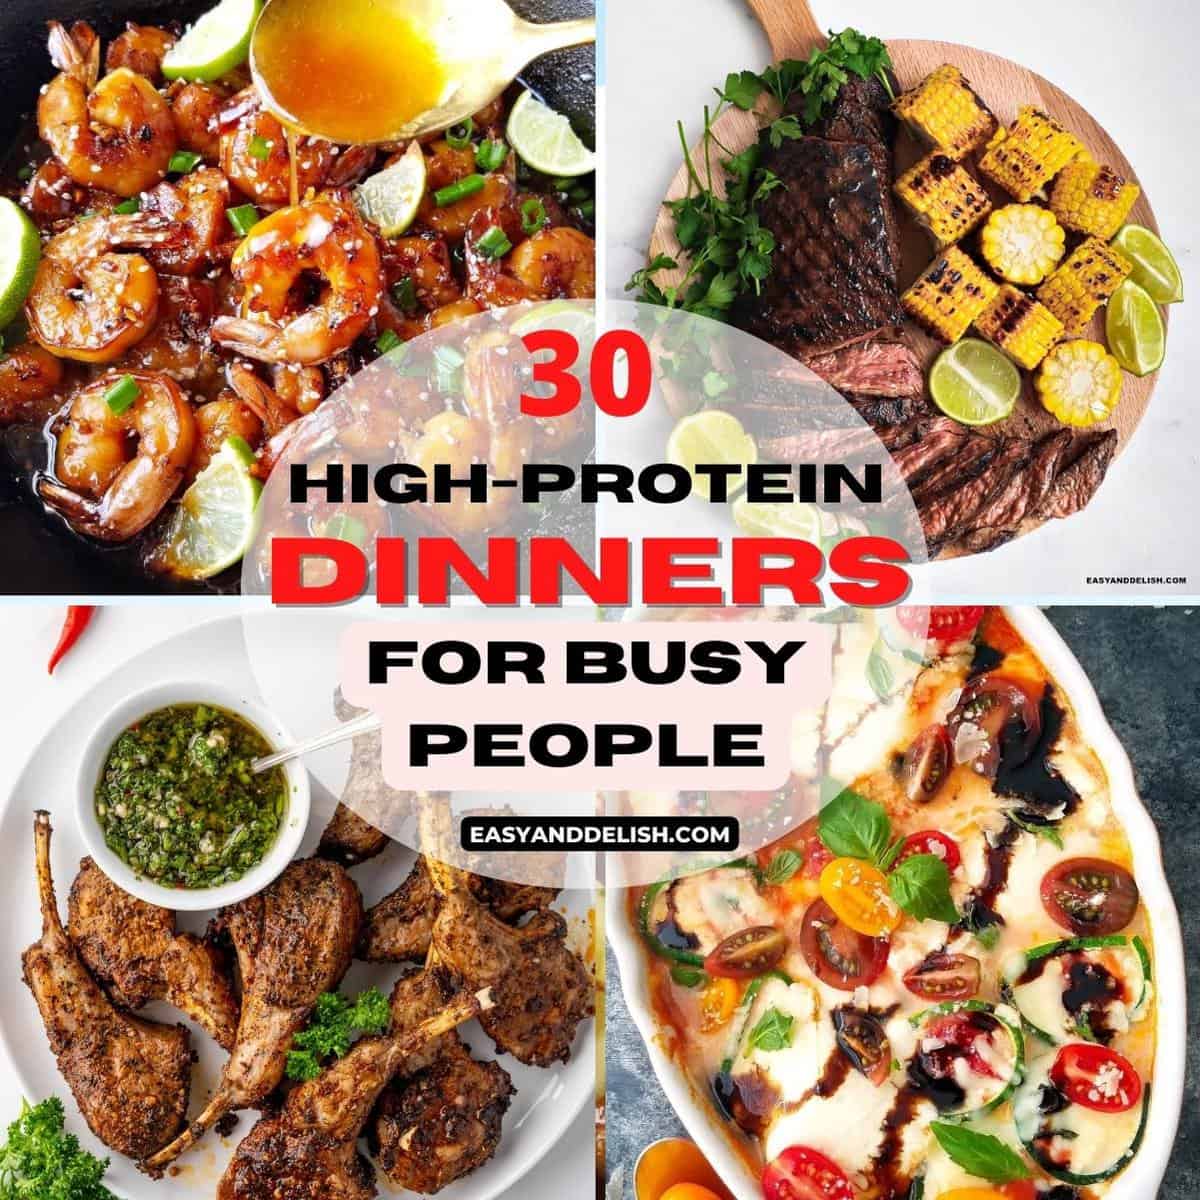 High-protein recipes for athletes